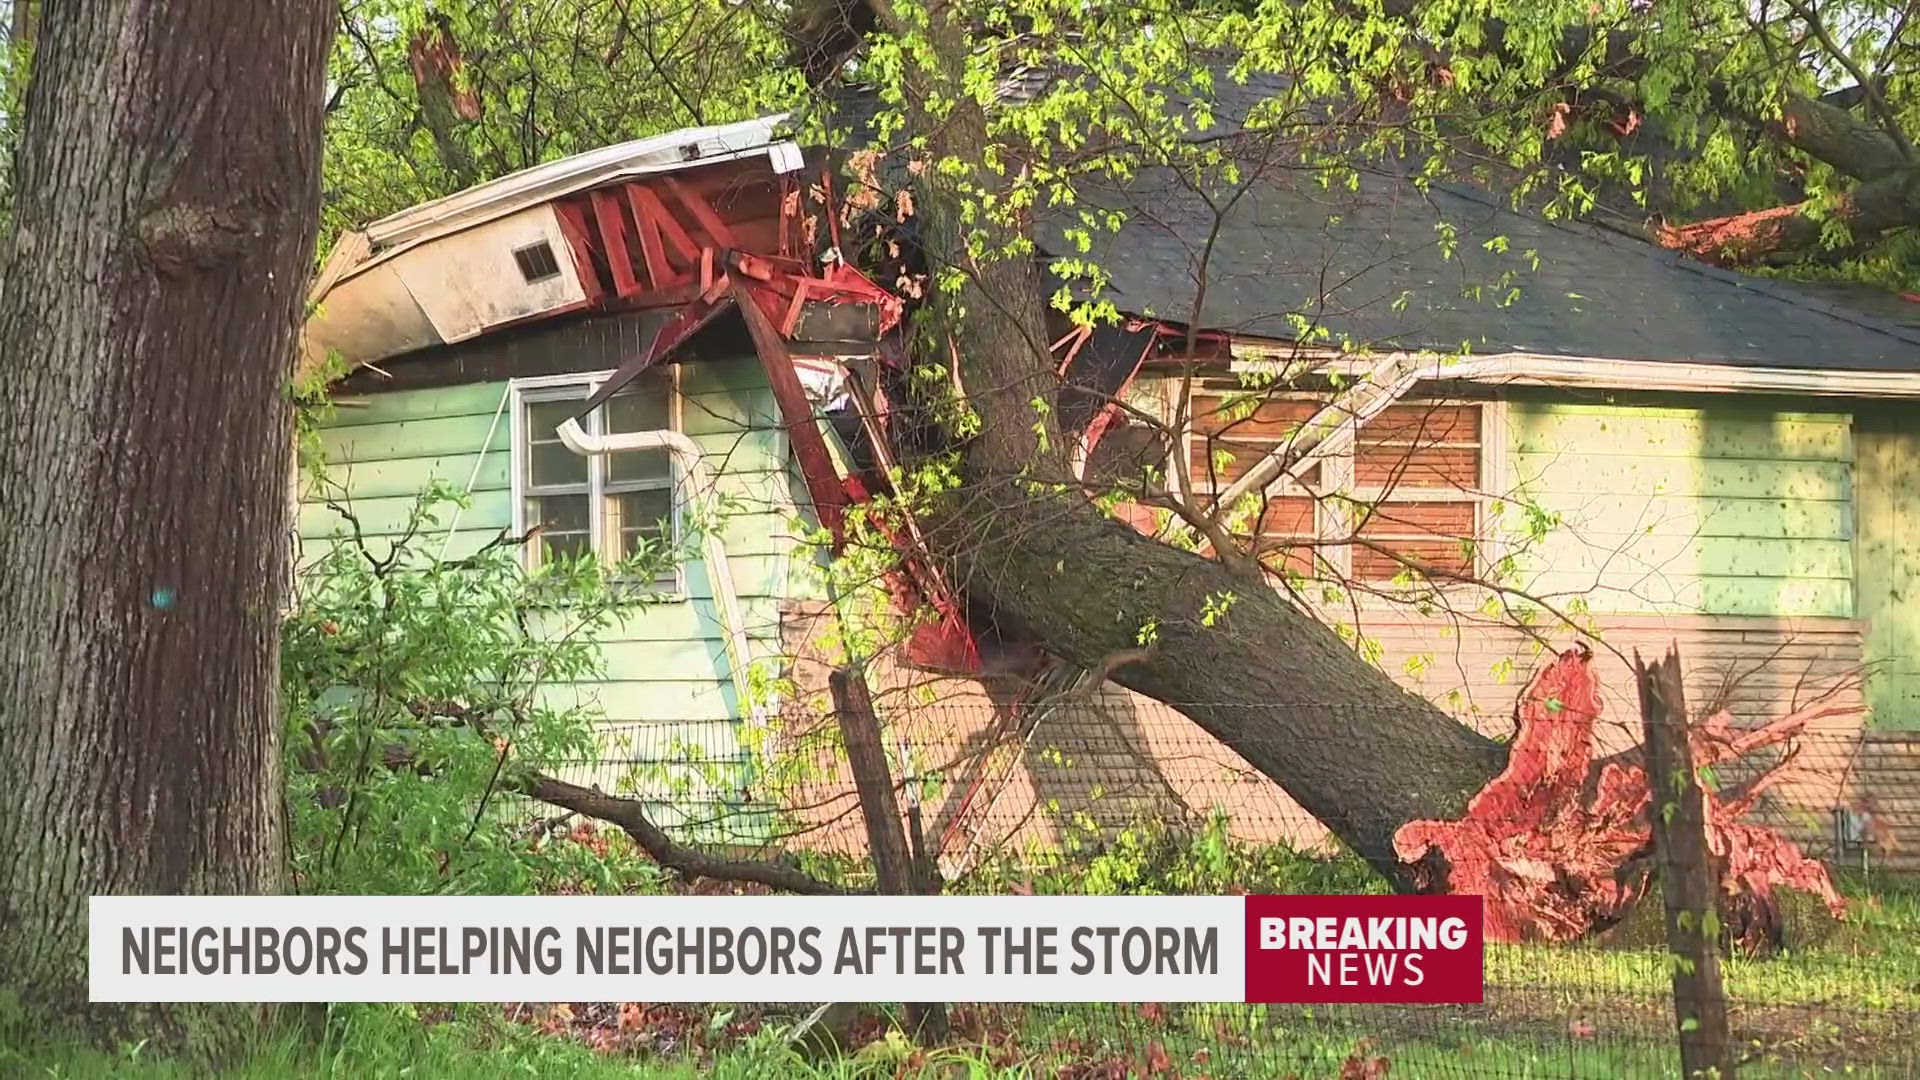 Neighbors in Portage are coming together to help one another after multiple tornados hit the community.